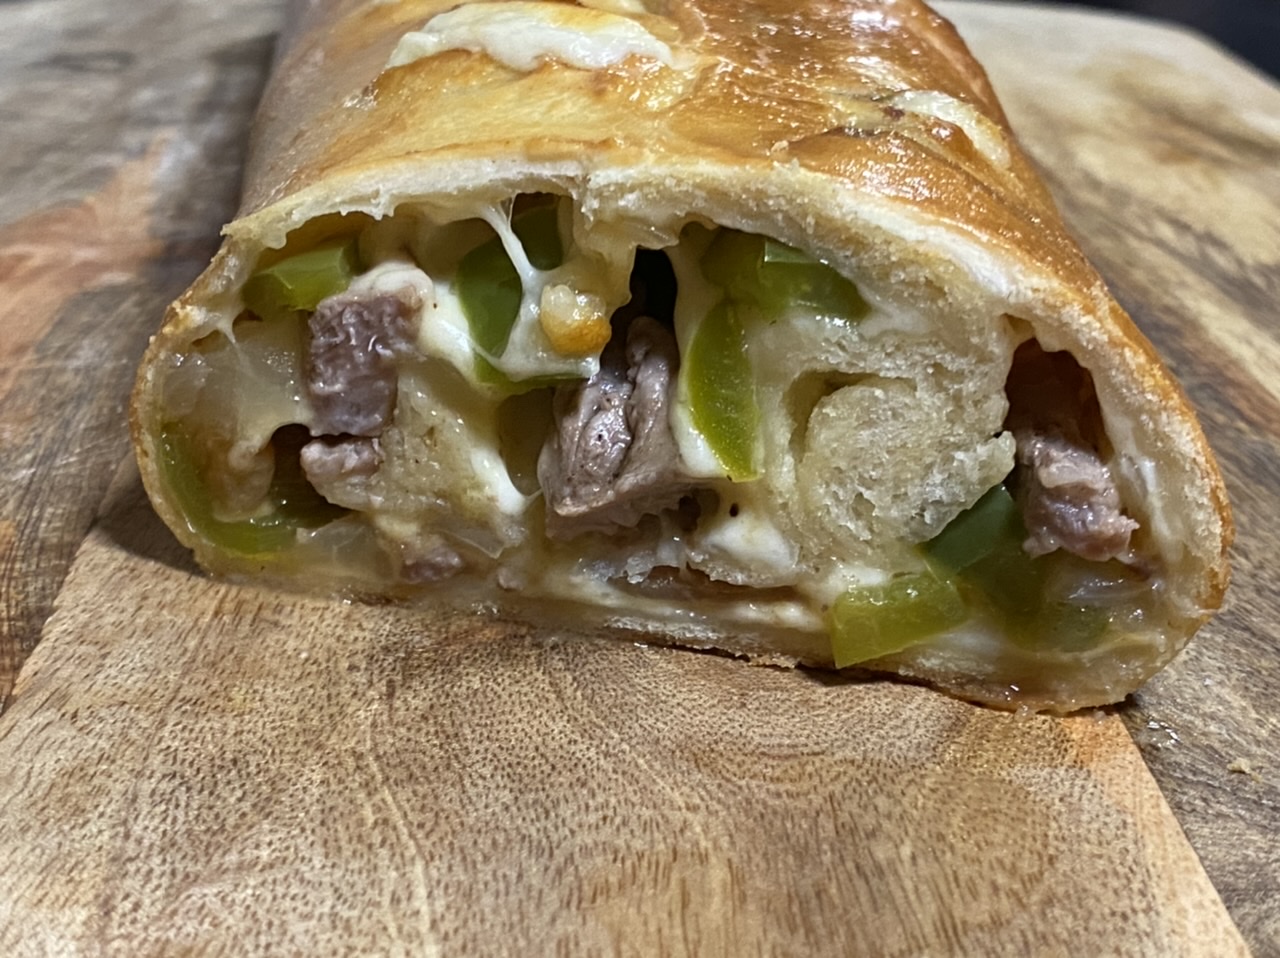 Philly cheesesteak Stromboli on top of a cutting board